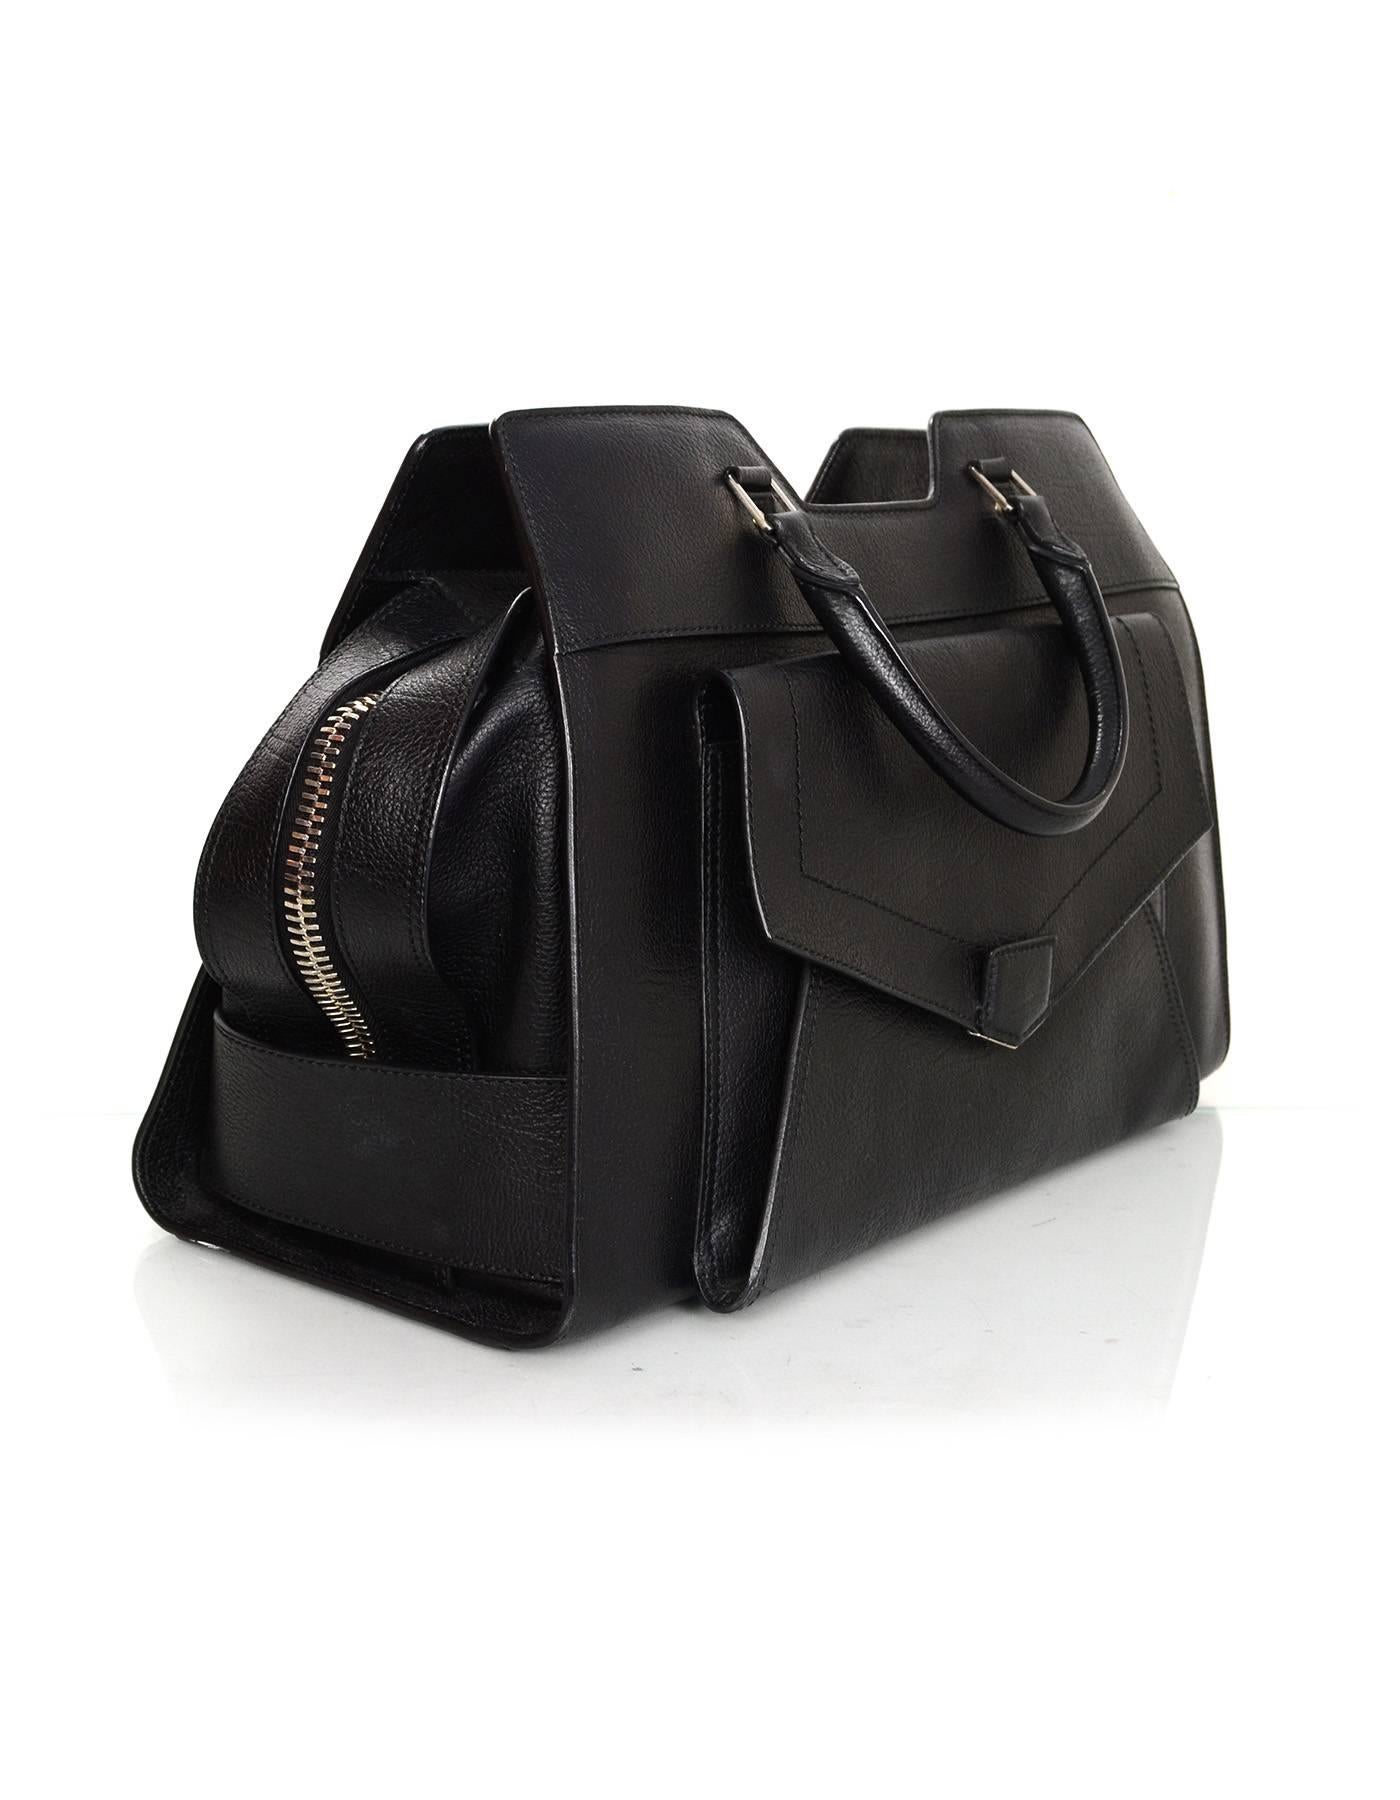 Proenza Schouler Black Leather Small PS13 Satchel 
Features optional shoulder/crossbody strap

Made In: Italy
Color: Black
Hardware: Silvertone
Materials: Leather
Lining: Beige linen
Closure/Opening: Double zip across top
Exterior Pockets: One front